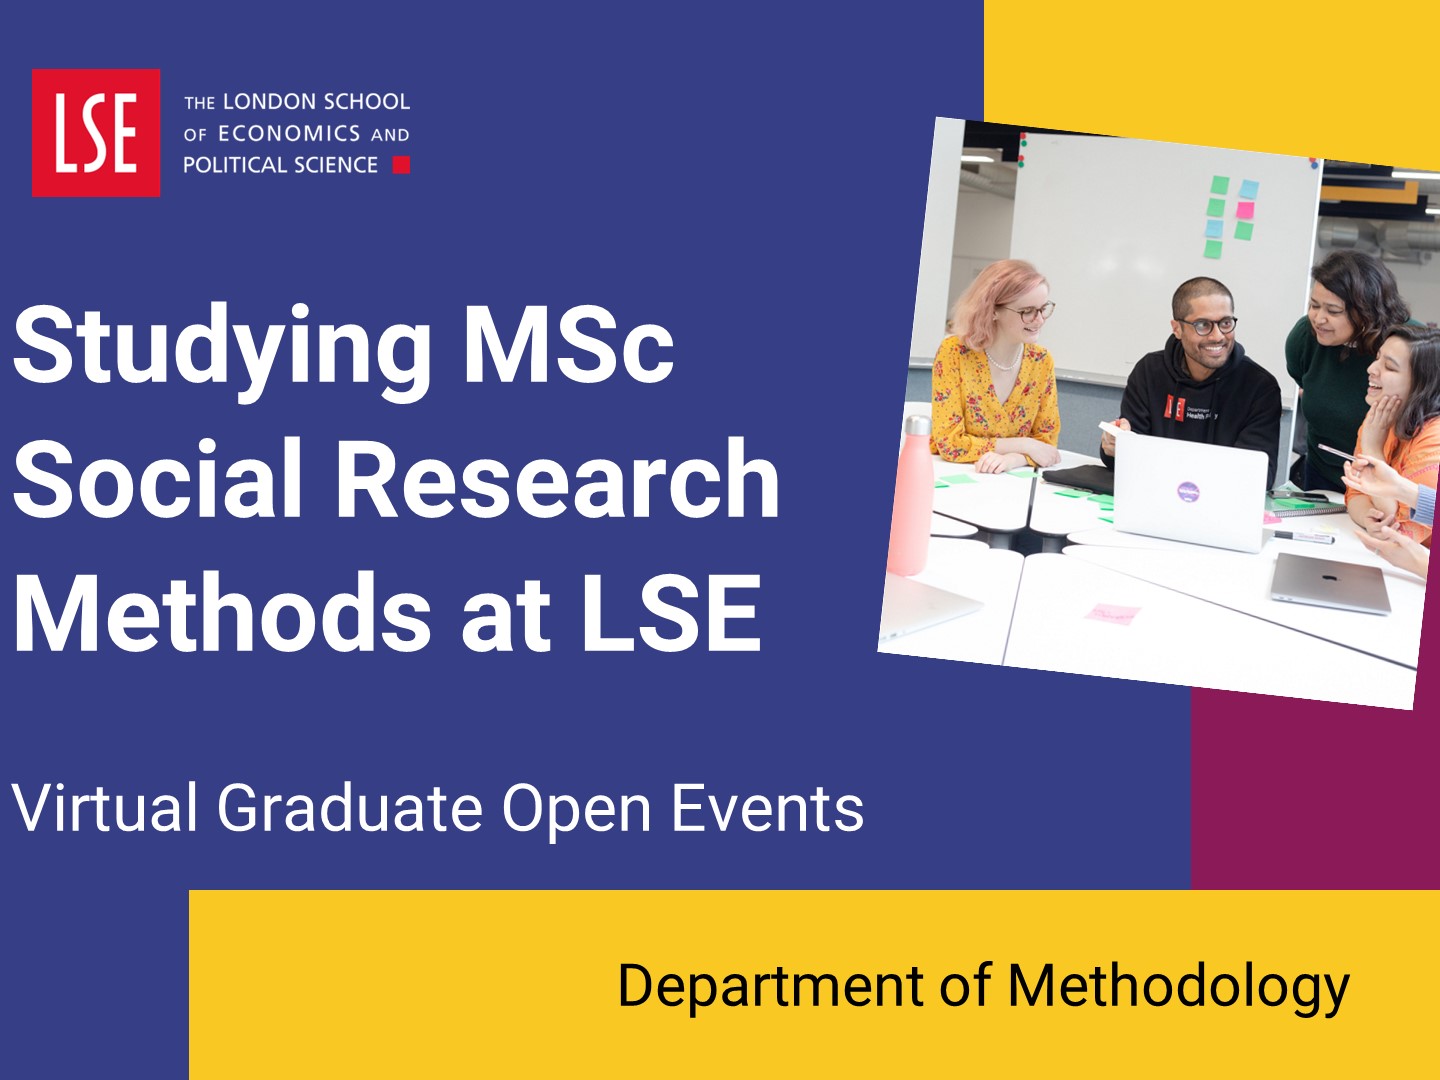 Studying MSc Social Research Methods at LSE